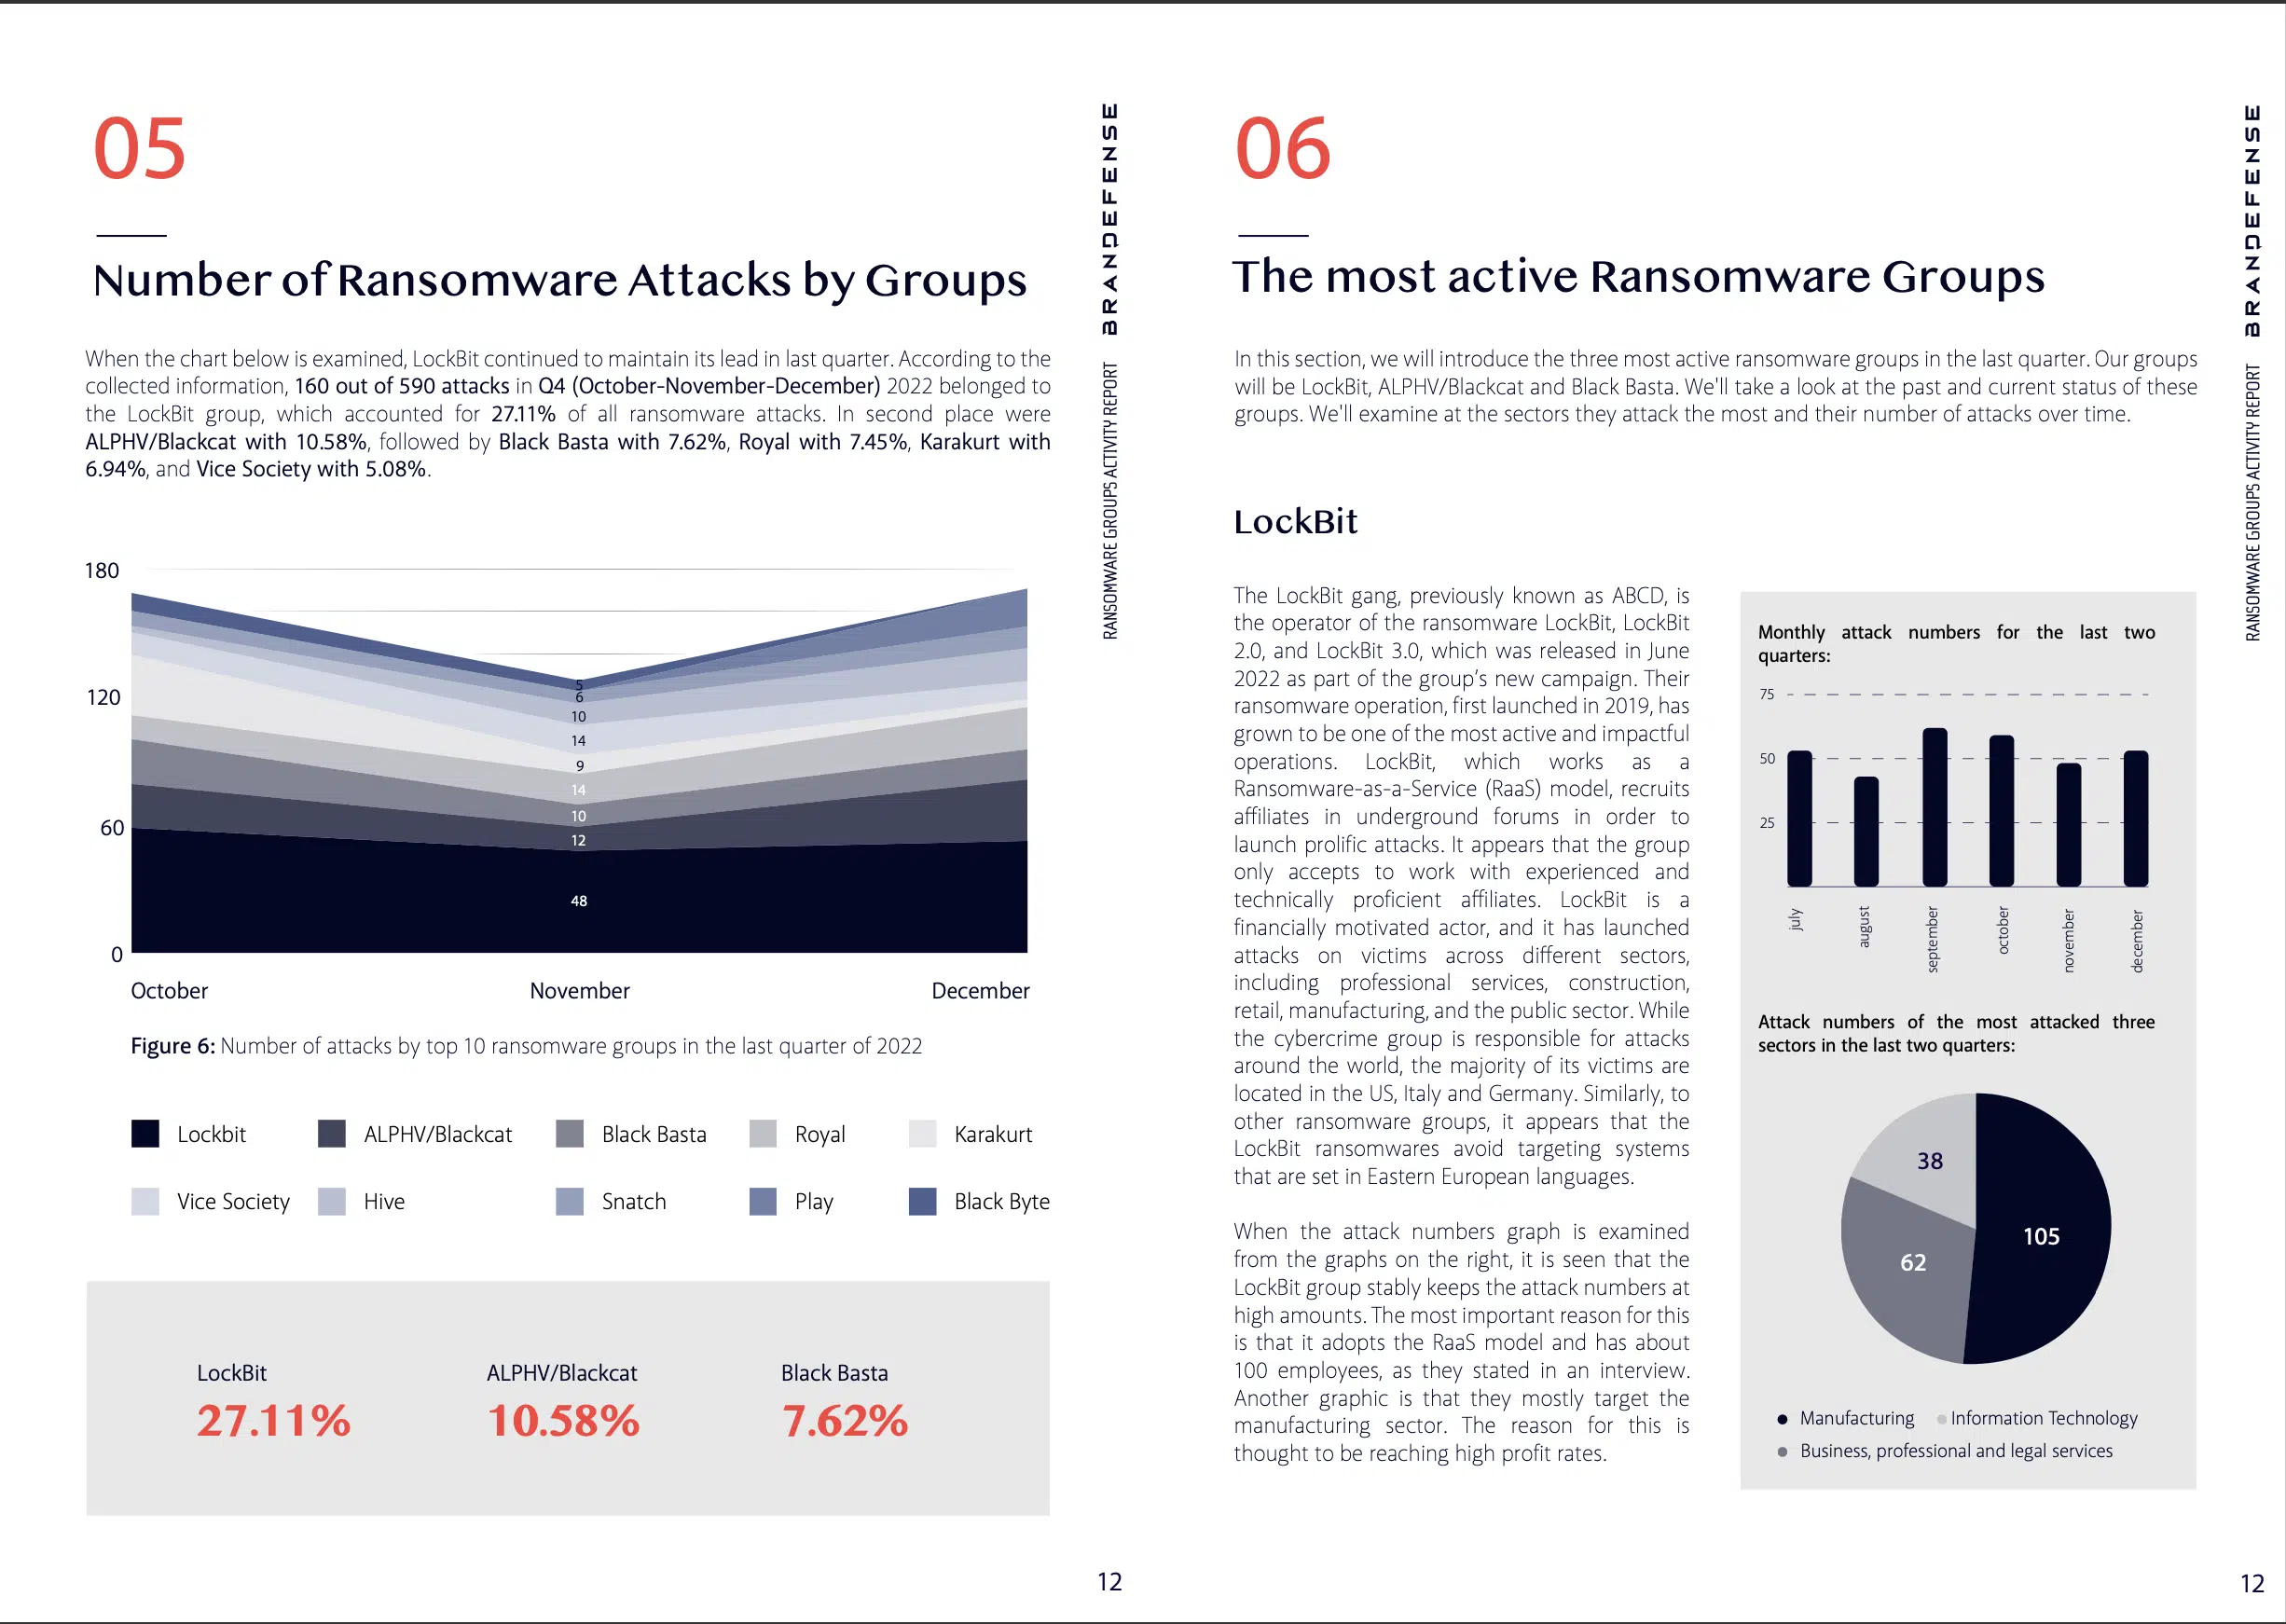 ransomware groups' top targeted industries